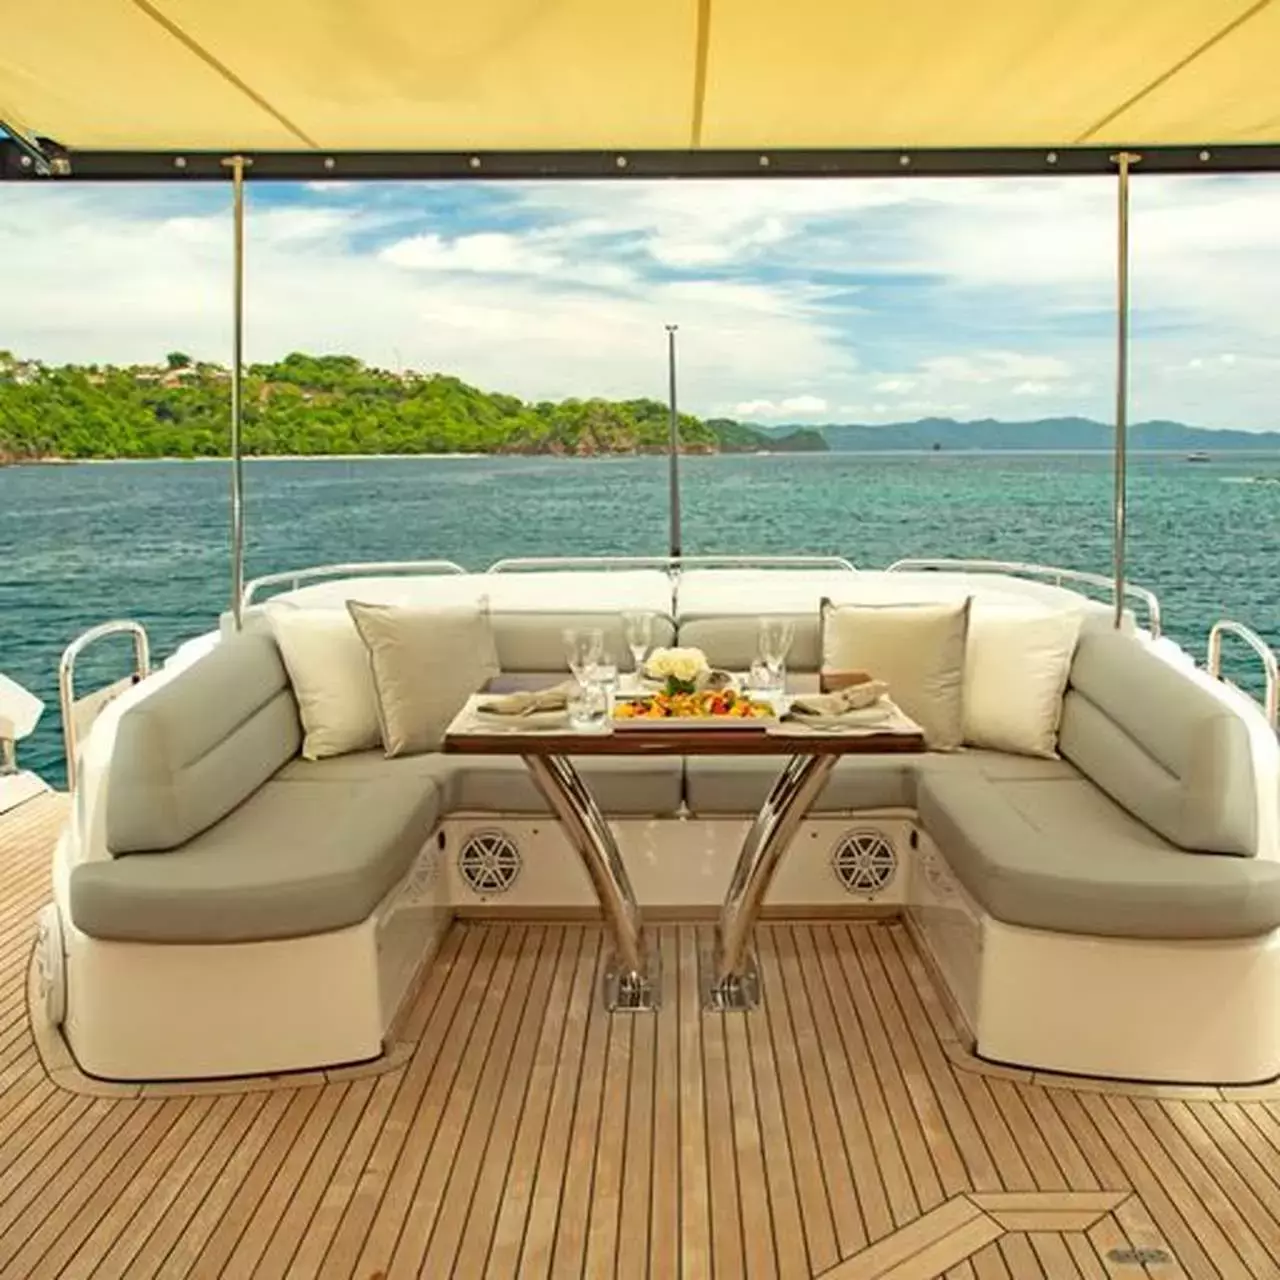 Costasol by Sunseeker - Top rates for a Charter of a private Motor Yacht in Panama